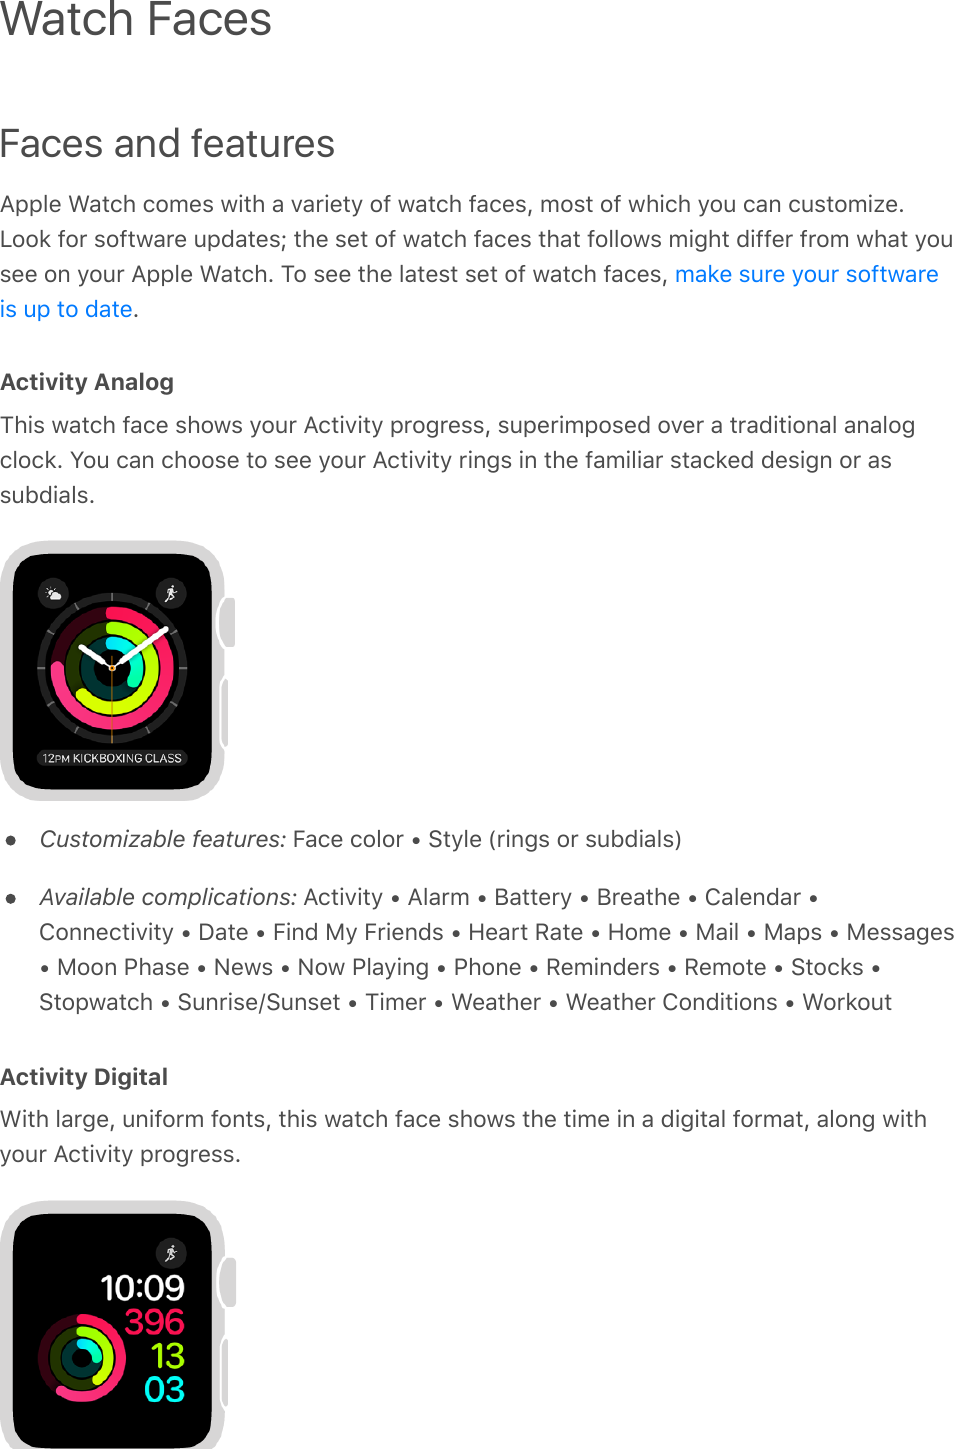 Faces and featuresApple Watch comes with a variety of watch faces, most of which you can customize.Look for software updates; the set of watch faces that follows might differ from what yousee on your Apple Watch. To see the latest set of watch faces, .Activity AnalogThis watch face shows your Activity progress, superimposed over a traditional analogclock. You can choose to see your Activity rings in the familiar stacked design or assubdials.Customizable features: Face color • Style (rings or subdials)Available complications: Activity • Alarm • Battery • Breathe • Calendar •Connectivity • Date • Find My Friends • Heart Rate • Home • Mail • Maps • Messages• Moon Phase • News • Now Playing • Phone • Reminders • Remote • Stocks •Stopwatch • Sunrise/Sunset • Timer • Weather • Weather Conditions • WorkoutActivity DigitalWith large, uniform fonts, this watch face shows the time in a digital format, along withyour Activity progress.Watch Facesmake sure your softwareis up to date